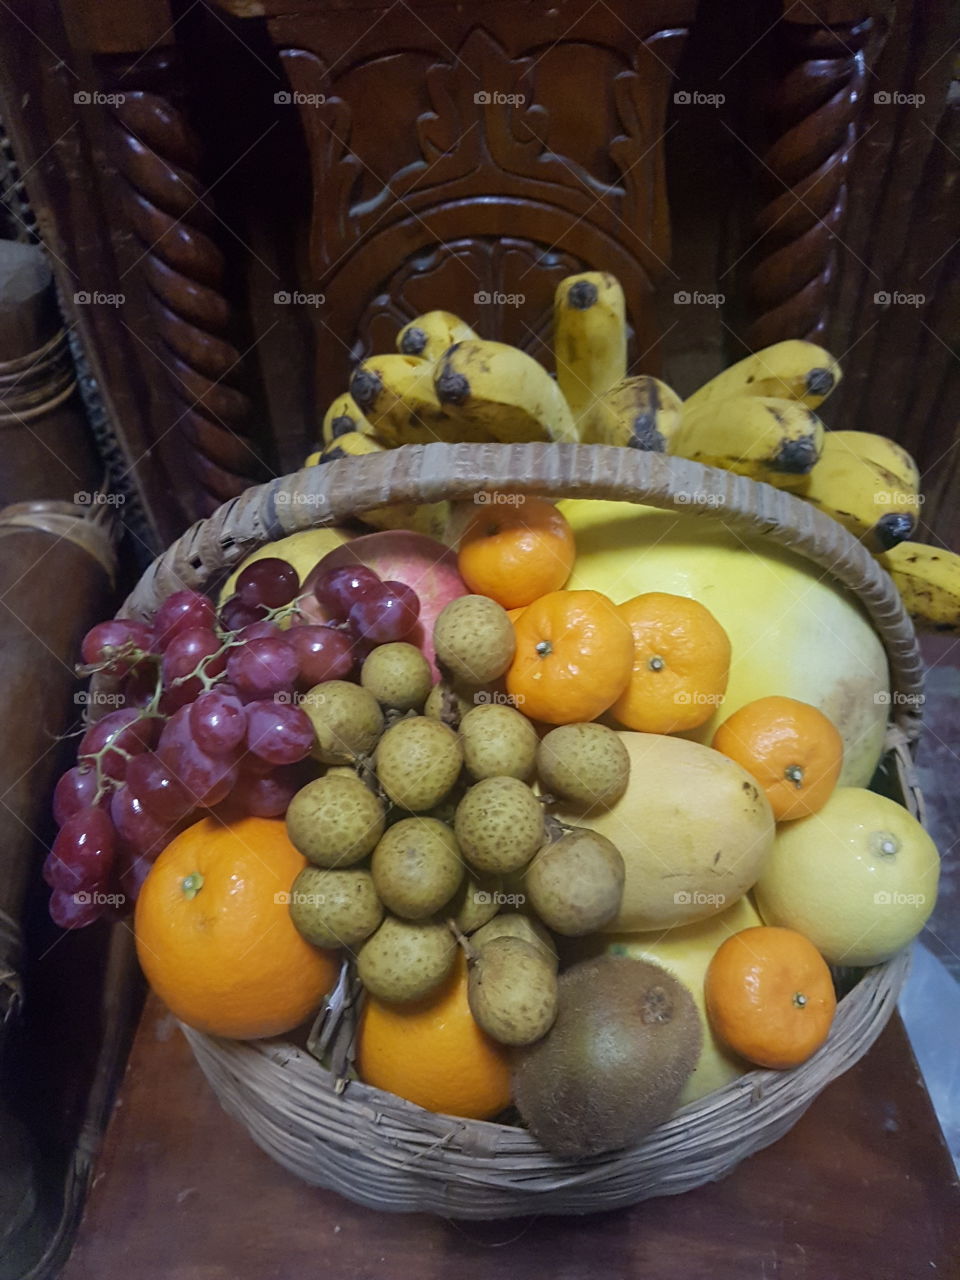 My fruit basket for the year 2020.
These fruits are different from one another but, they fit into one basket. Each fruit has its own characteristicsjust like people but when they come together in a well arranged manner, they form a beautiful picture.